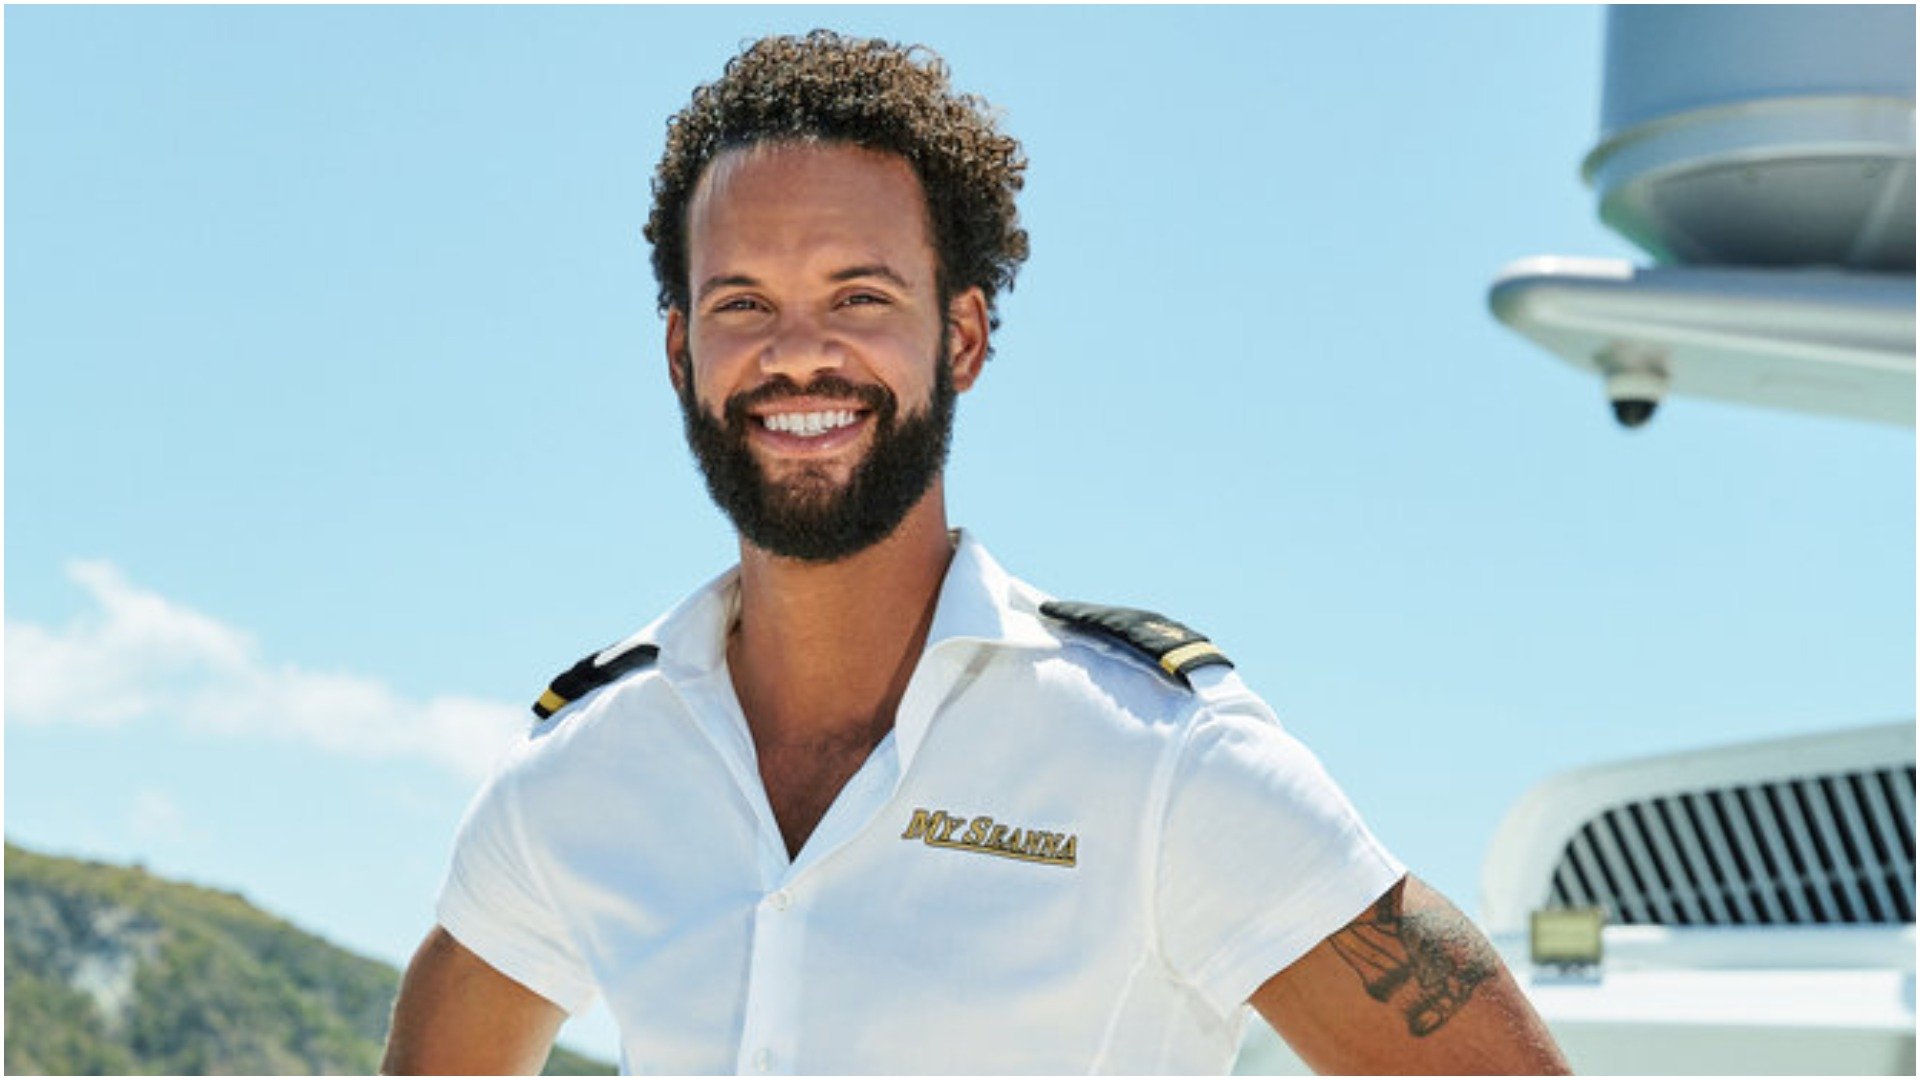 Wes O'Dell from Below Deck opened up about staying out of the drama on the show. 